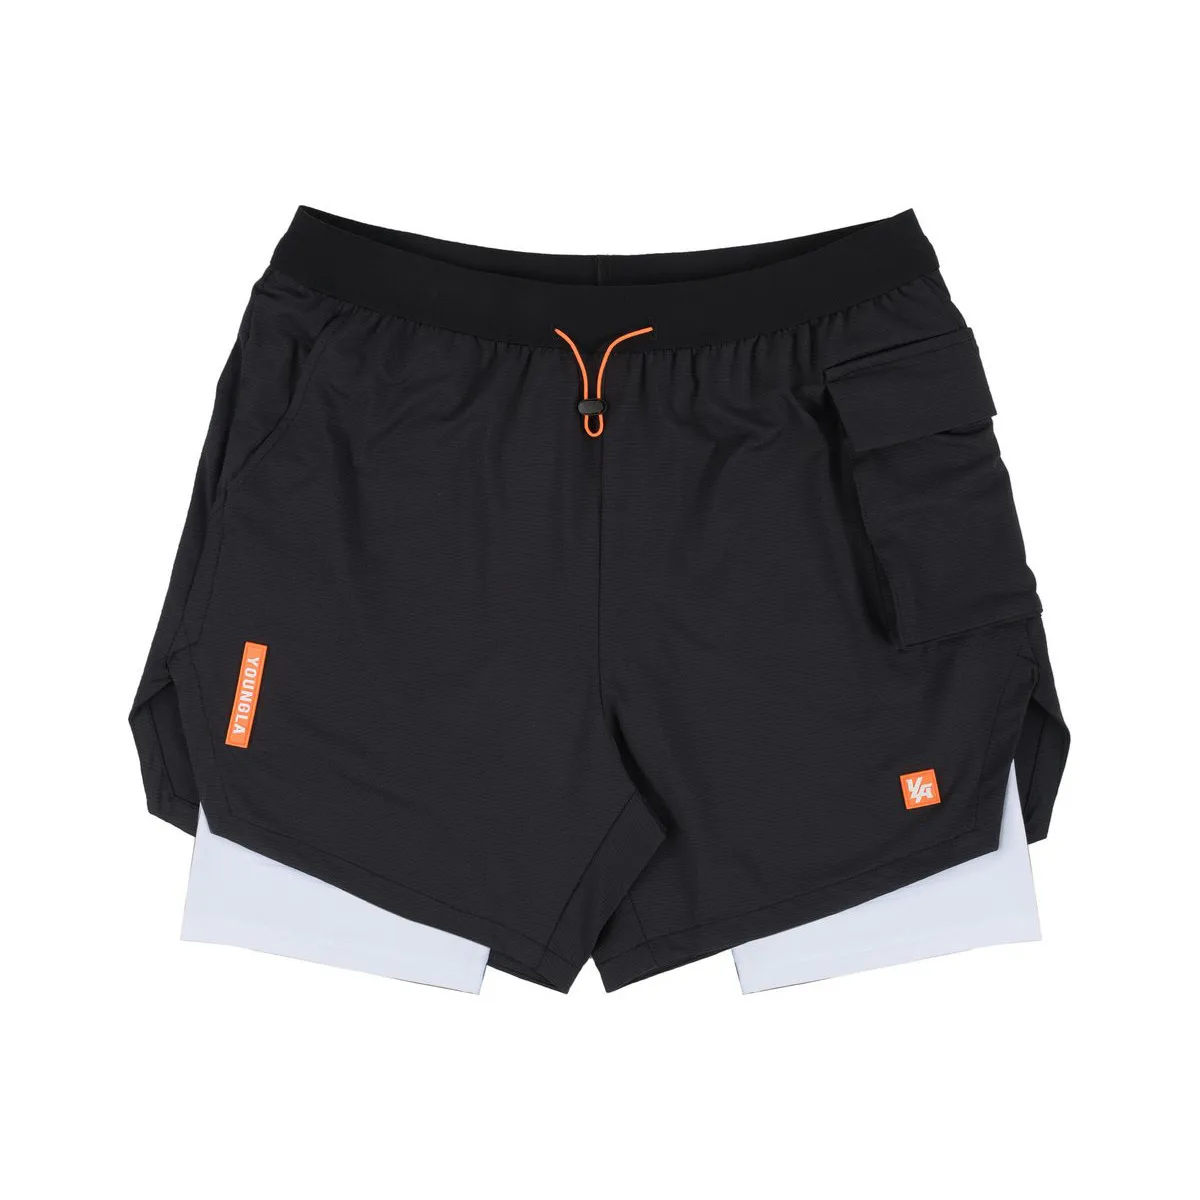 2 in 1 Fitness Shorts Men Double Layer Casual Bermuda Summer Gym Bodybuilding Training Short Pants Male Running Sport Bottoms best men's casual shorts Casual Shorts